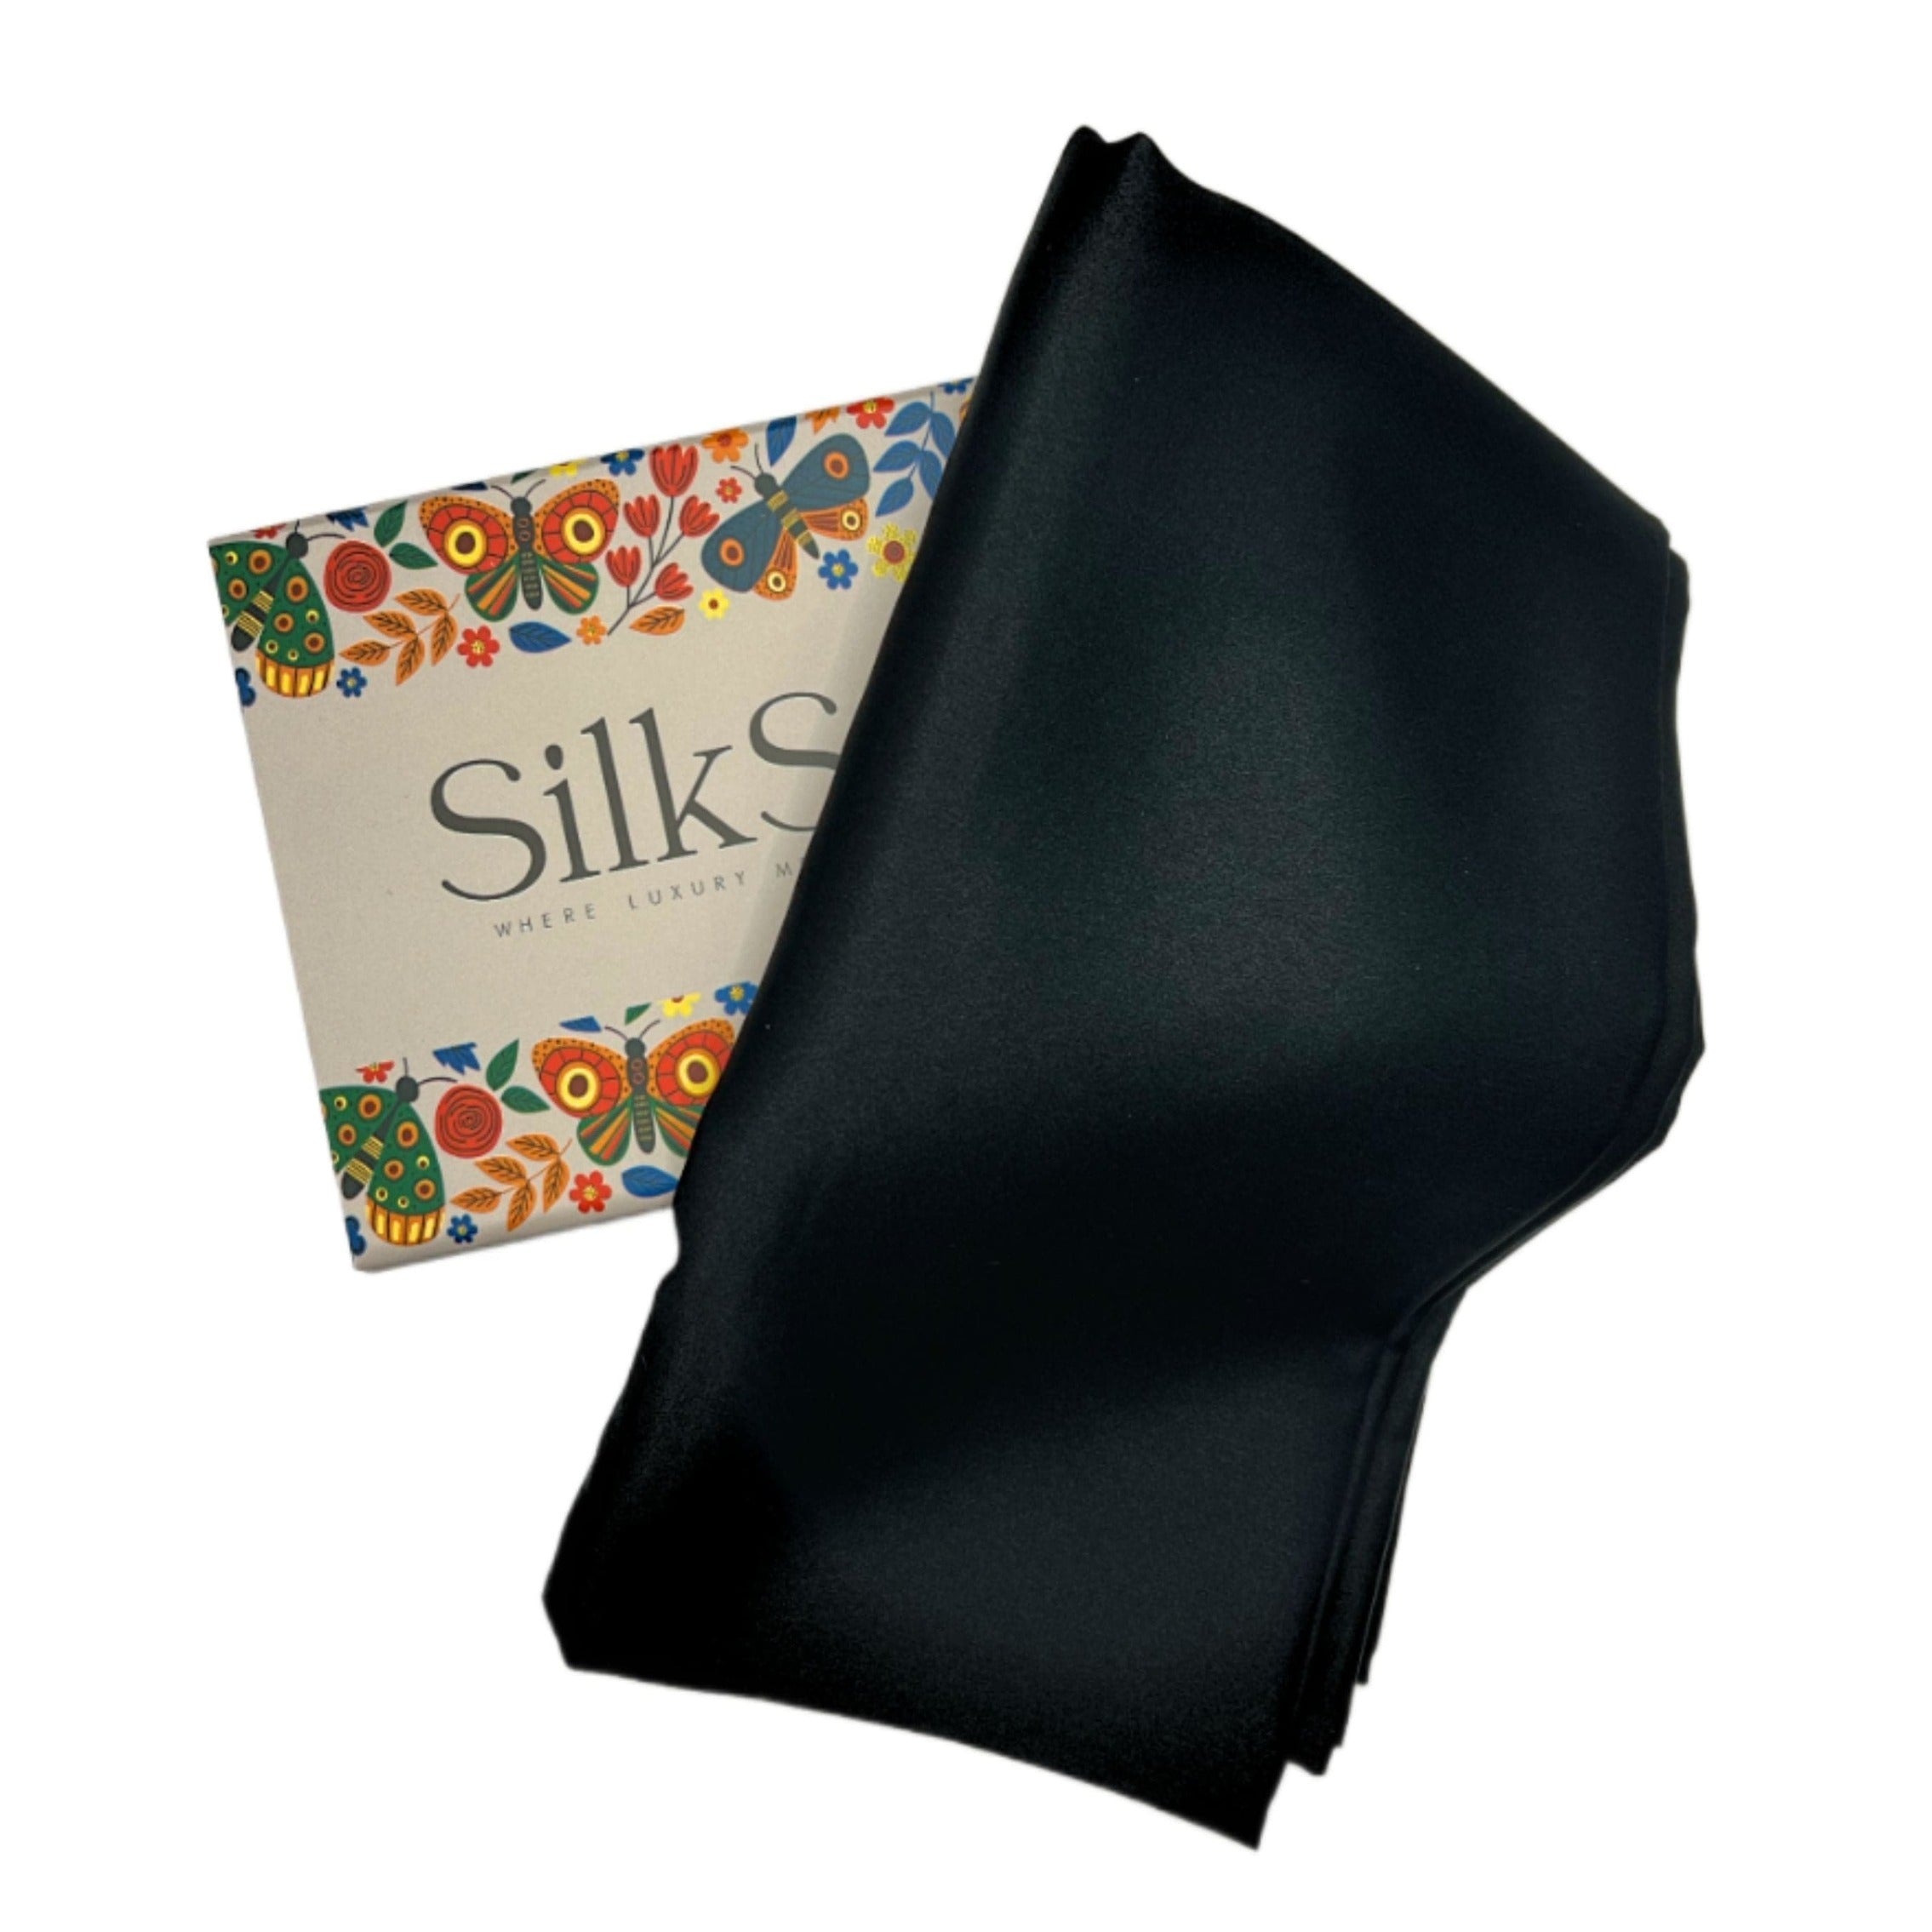 Pure Mulberry Silk Scarf, Hijab From Silksouq & Silksouk, Also Known As Silk Souq In Uae